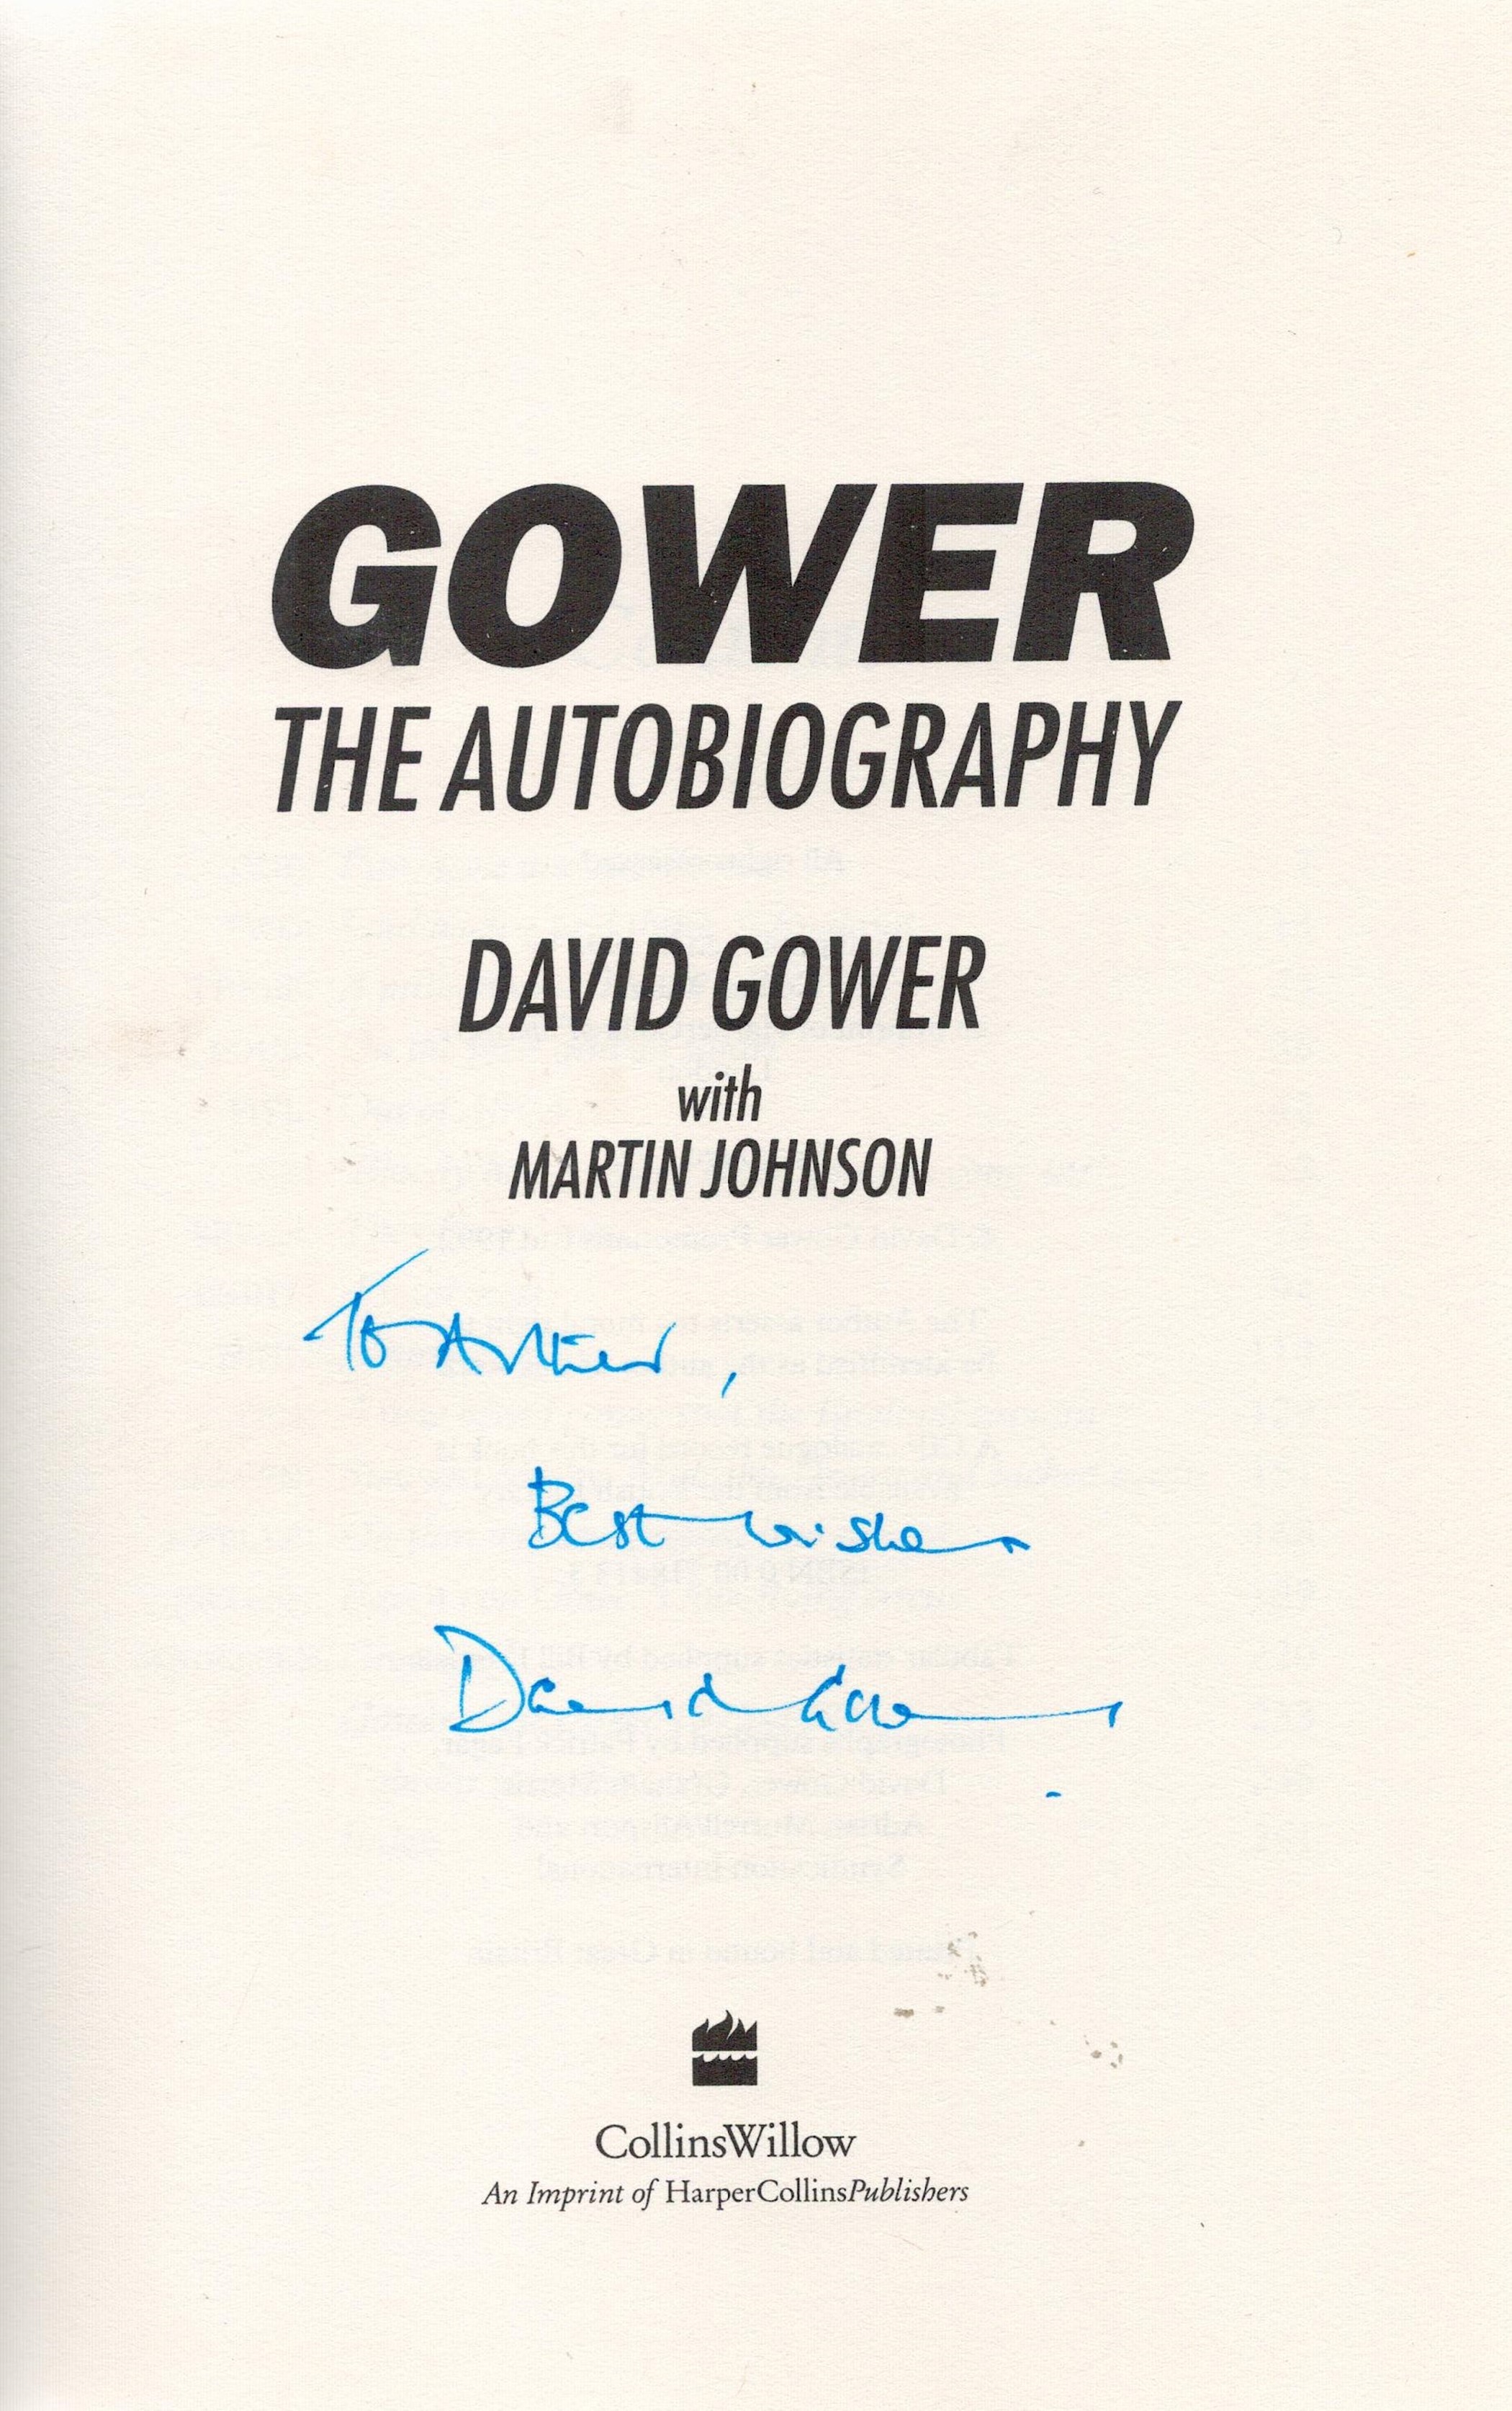 Signed Book David Gower The Autobiography Second Edition 1992 Hardback Book Signed by David Gower on - Image 2 of 4